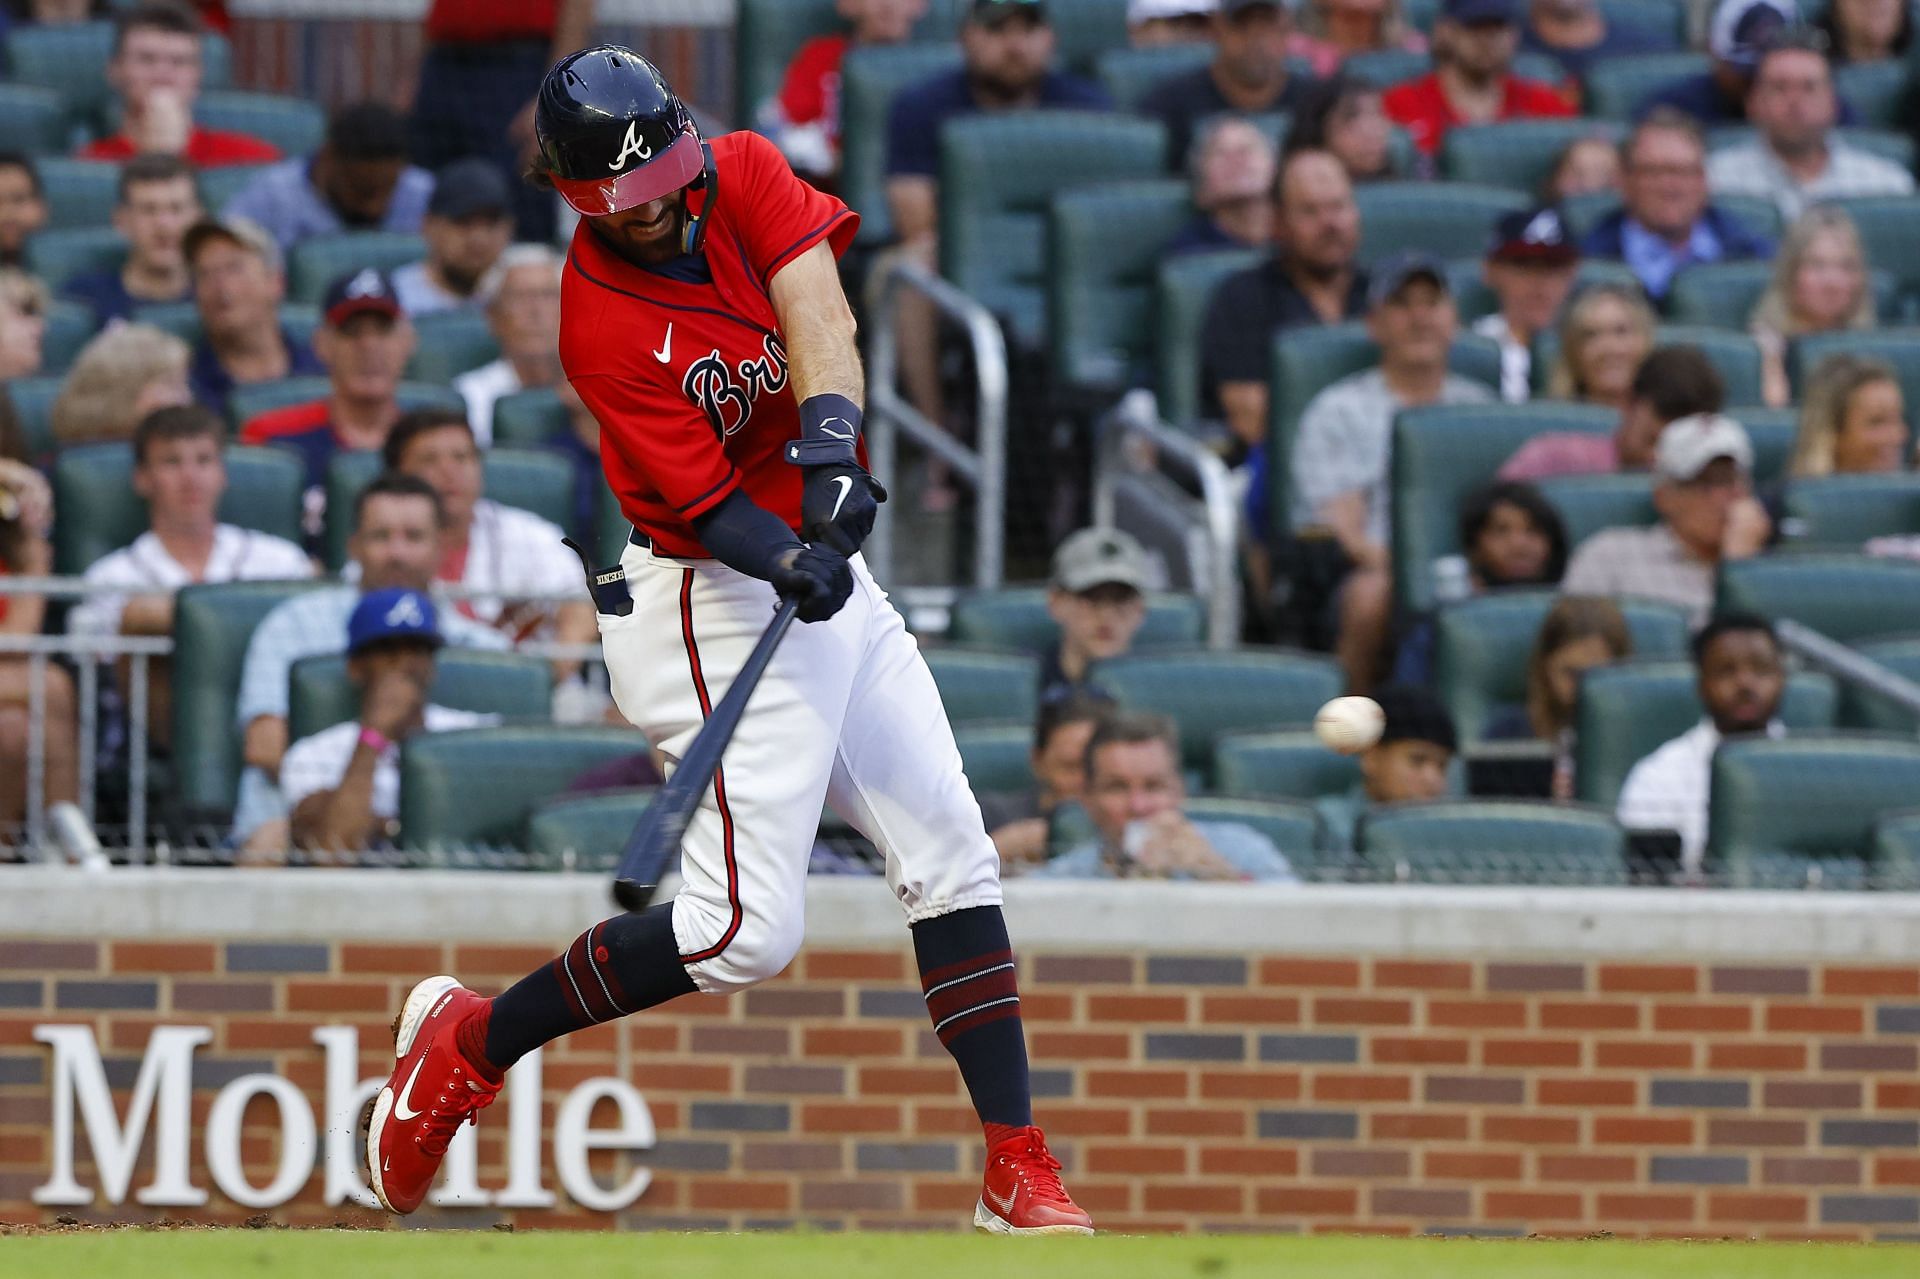 Atlanta Braves Shortstop Dansby Swanson Looking to Build off Hot Start